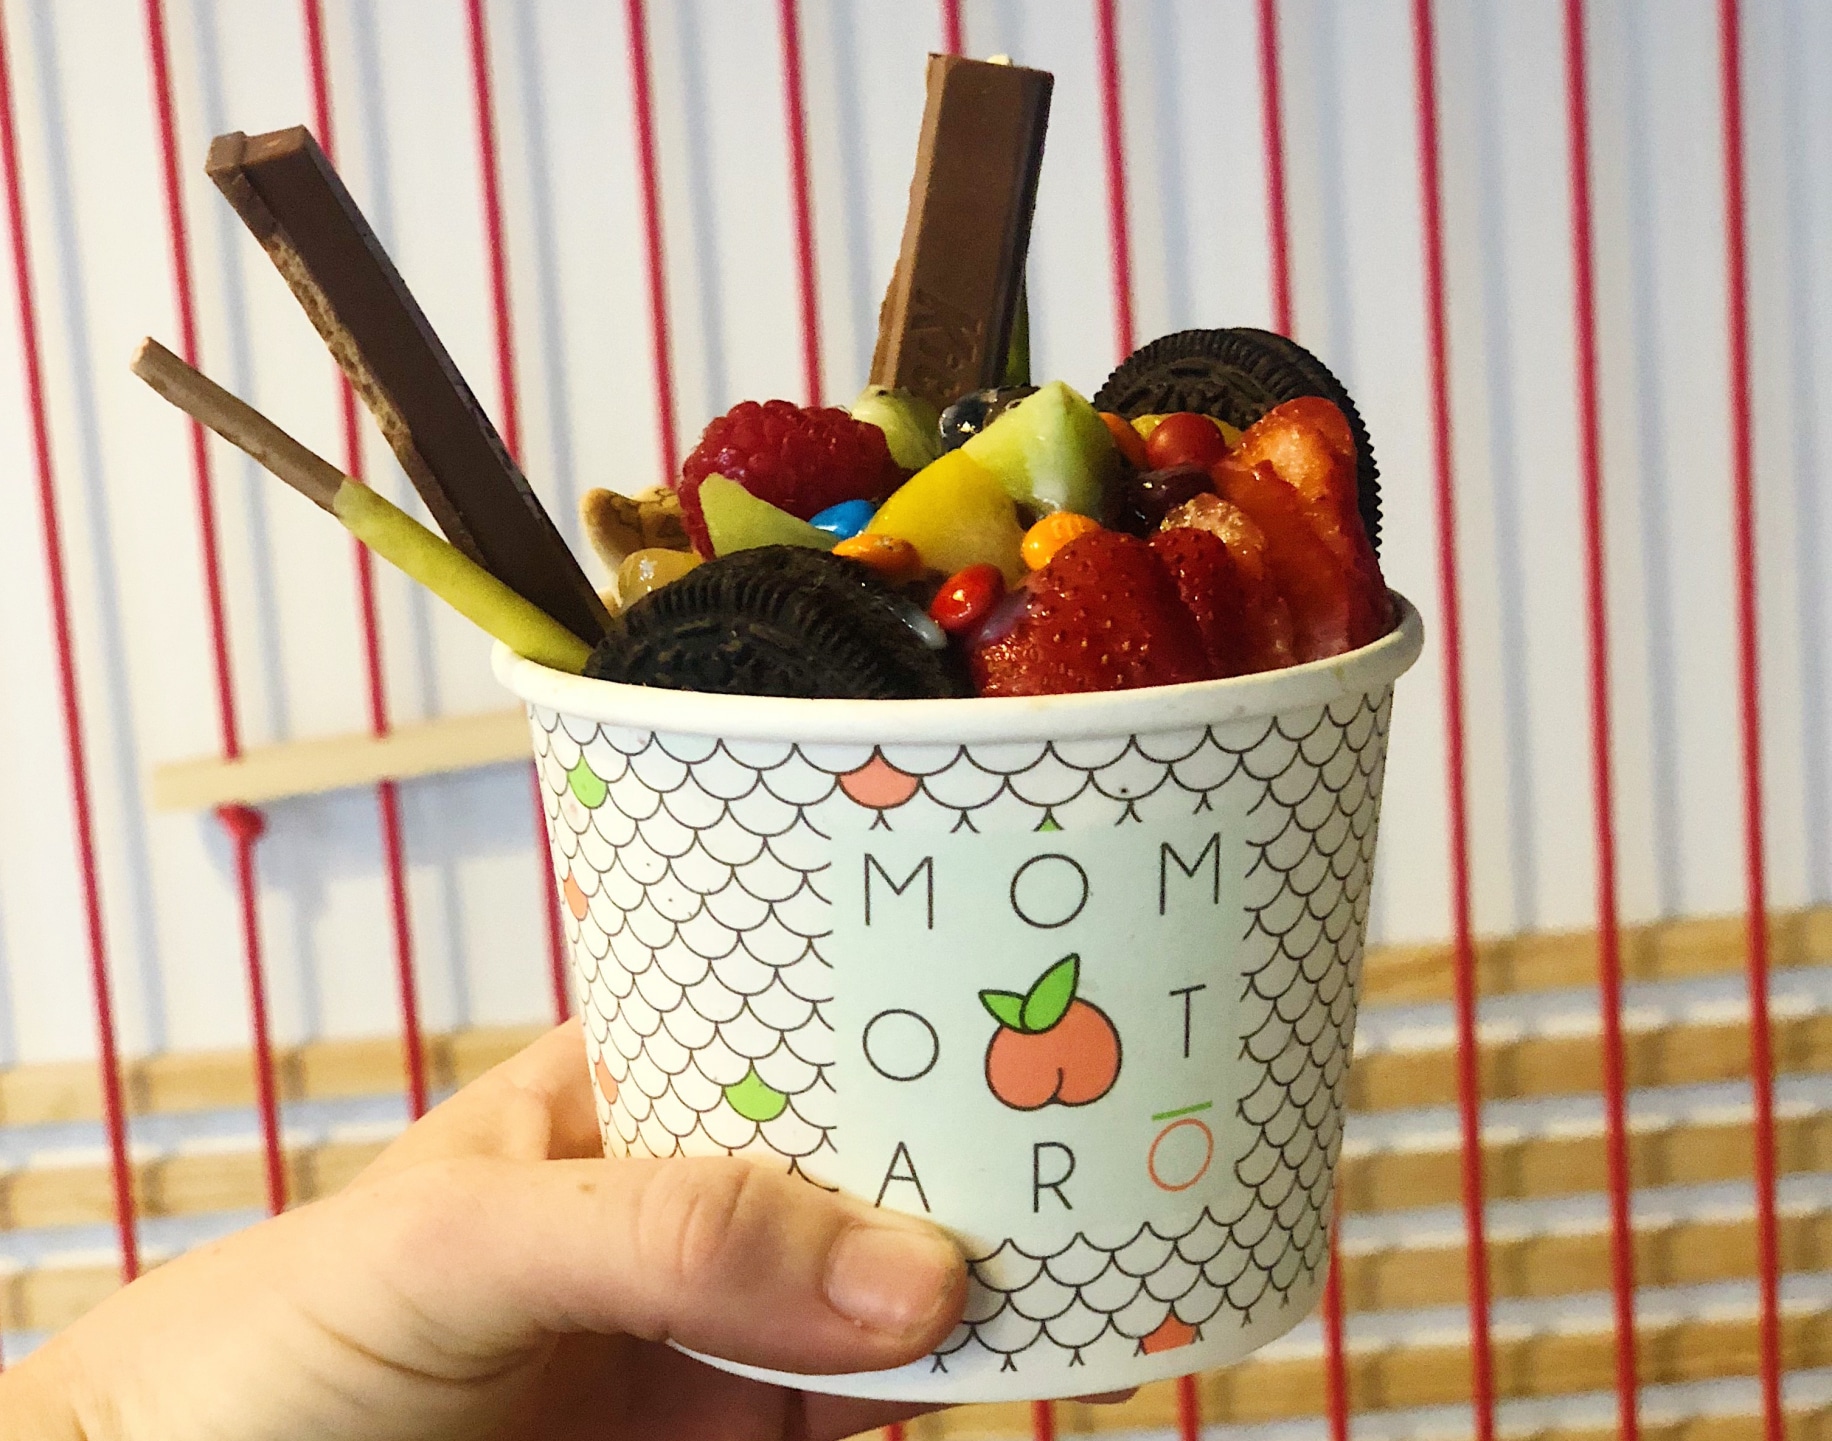 momotaro5 1 Momotarõ opens in Five Points, and has us dreaming of hand-rolled ice cream